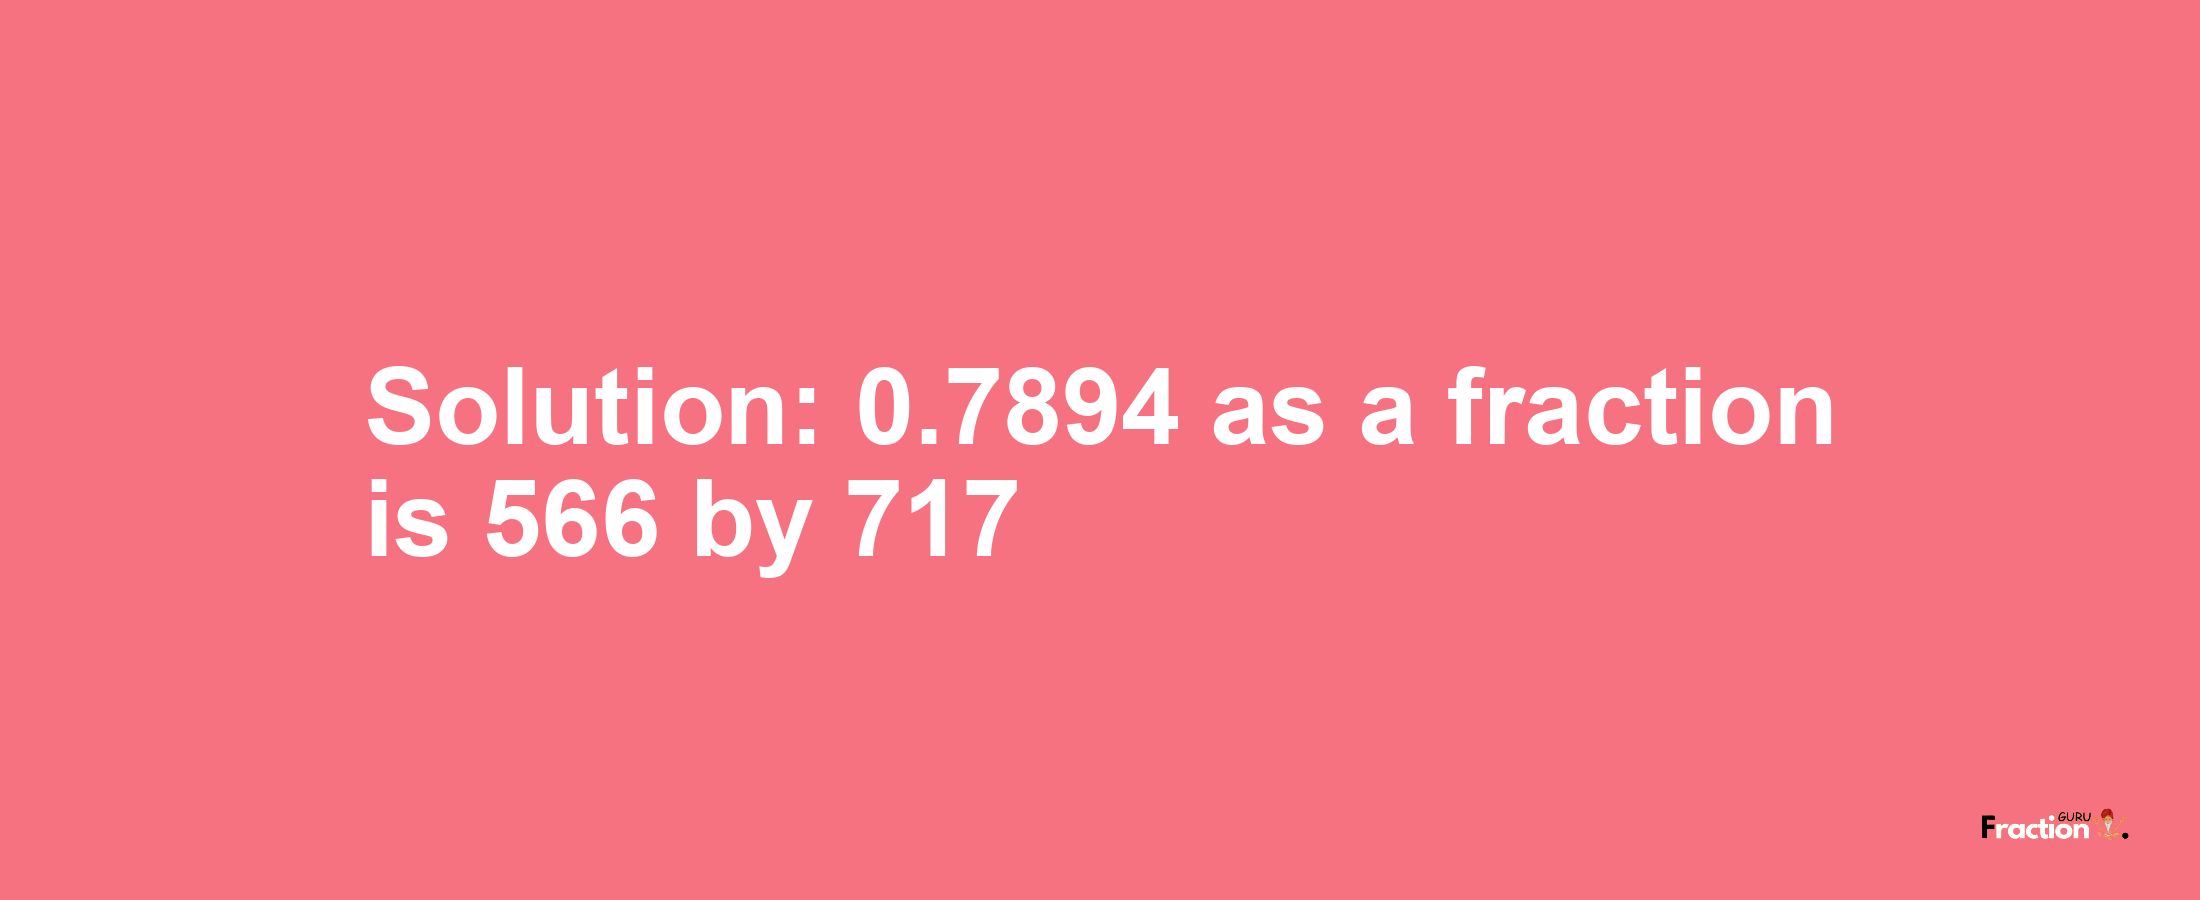 Solution:0.7894 as a fraction is 566/717